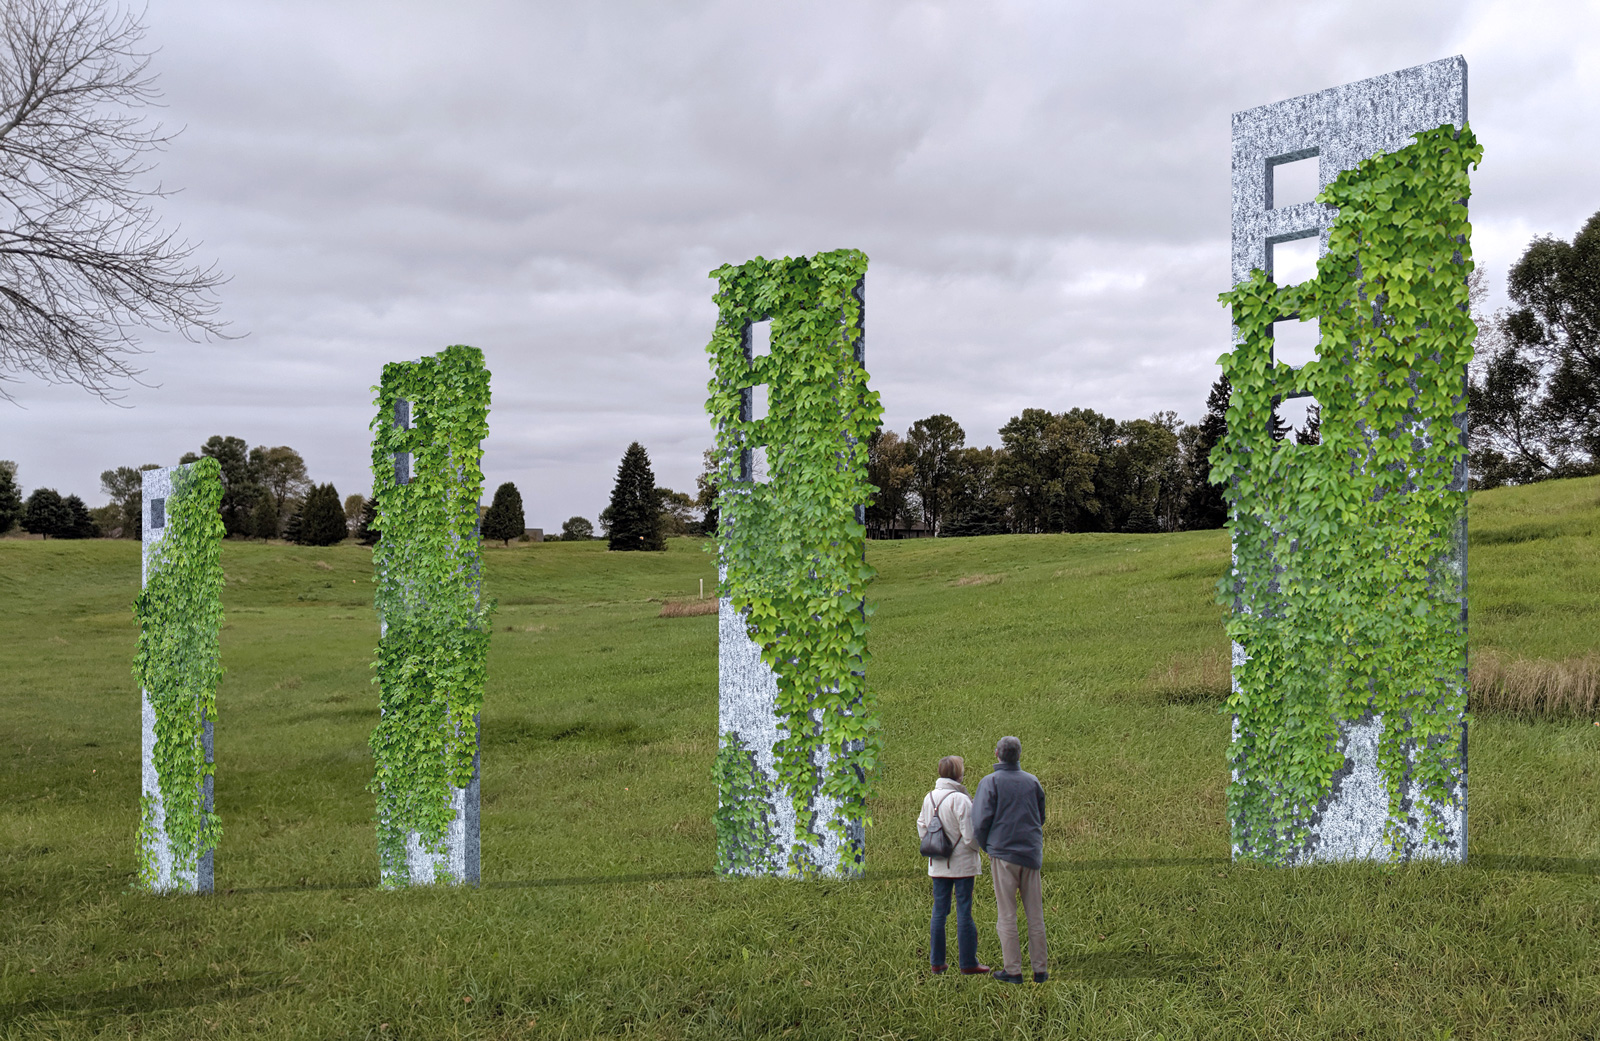 2 people look up at large structures covered by ivy